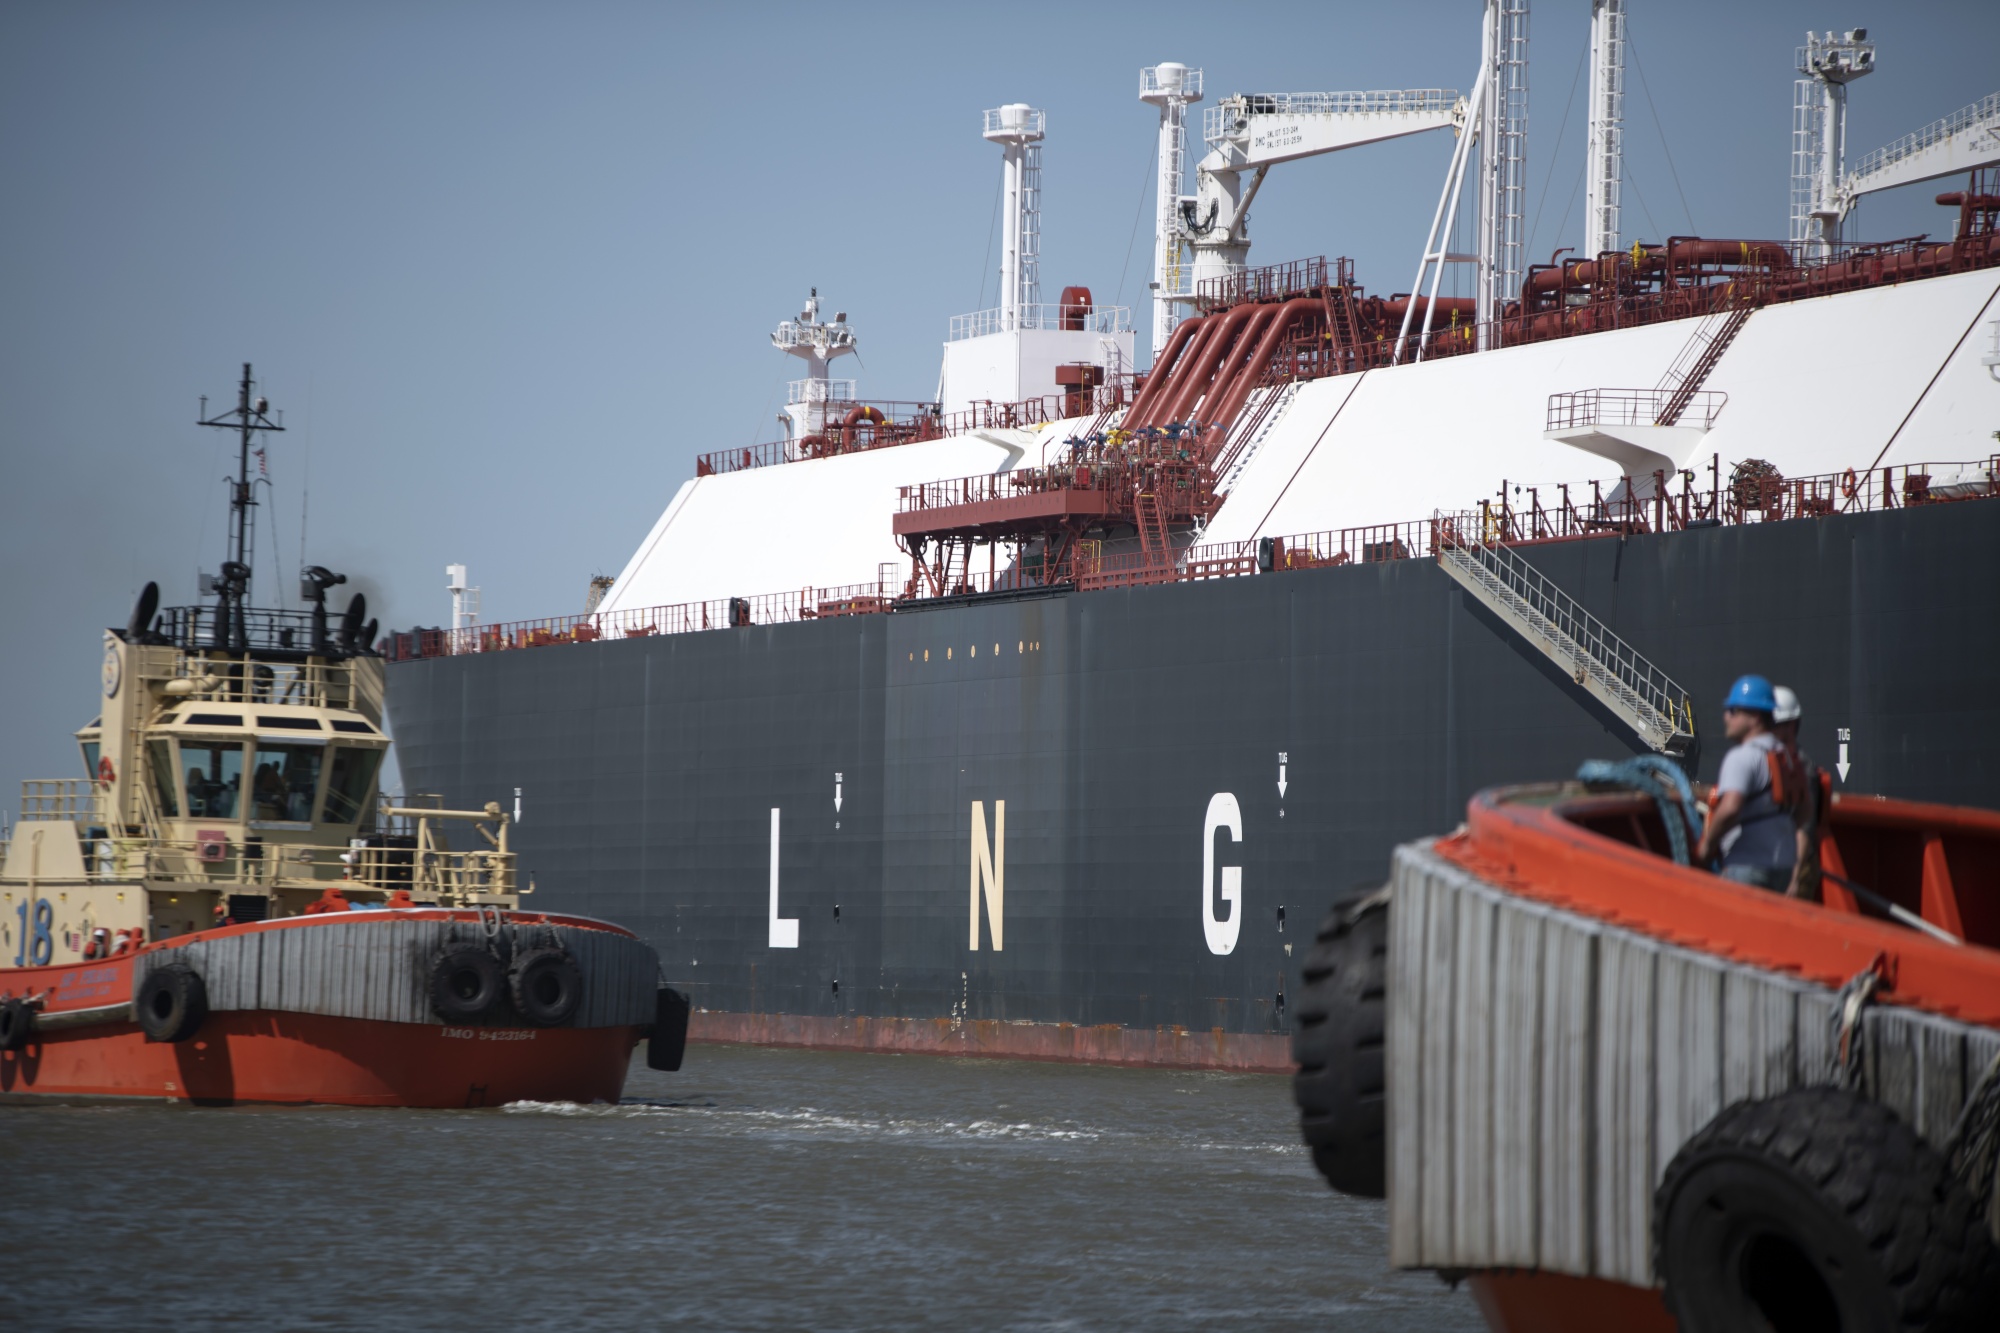 Tug boats prepare to pull out an LNG tanker at the Cheniere Sabine Pass Liquefaction facility in Cameron, Louisiana on April. 14, 2022.